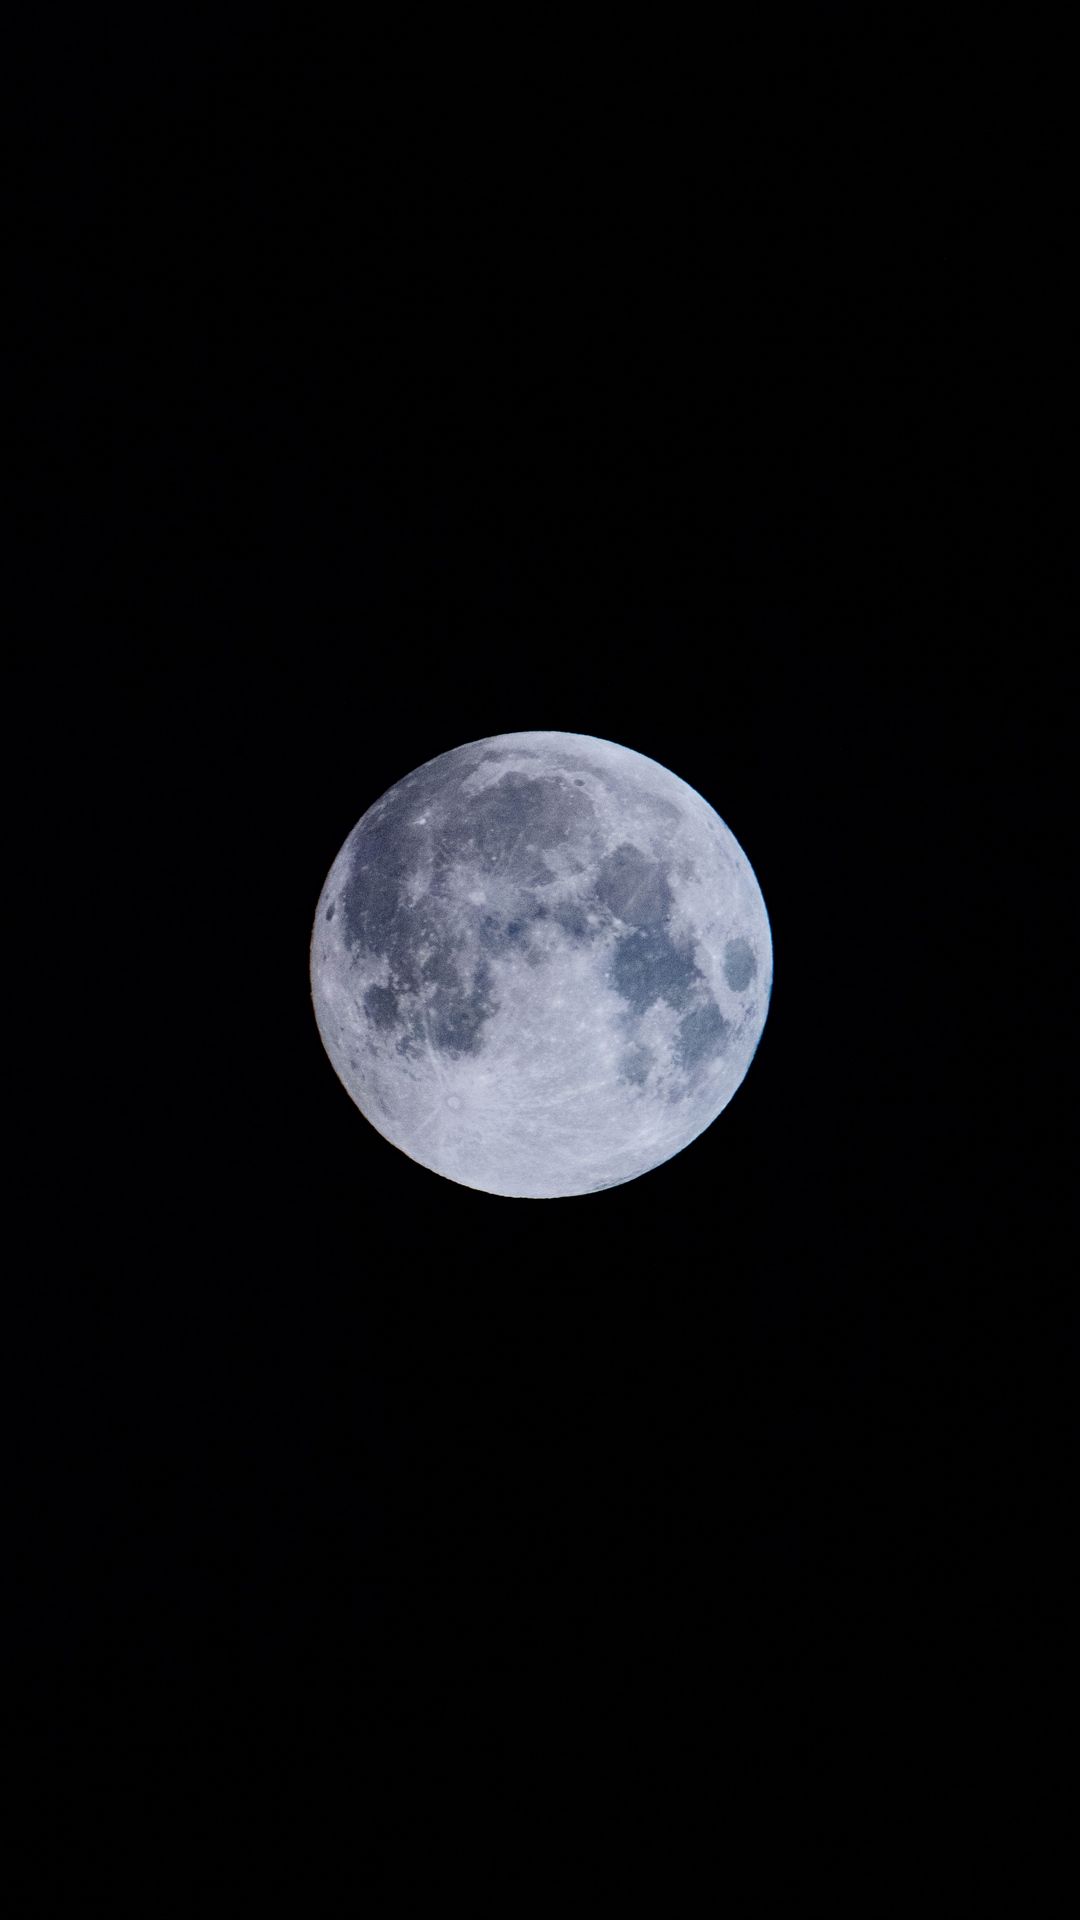 Download wallpaper x full moon moon satellite space samsung galaxy s s note sony xperia z z z z hâ galaxy wallpaper moon moon photography